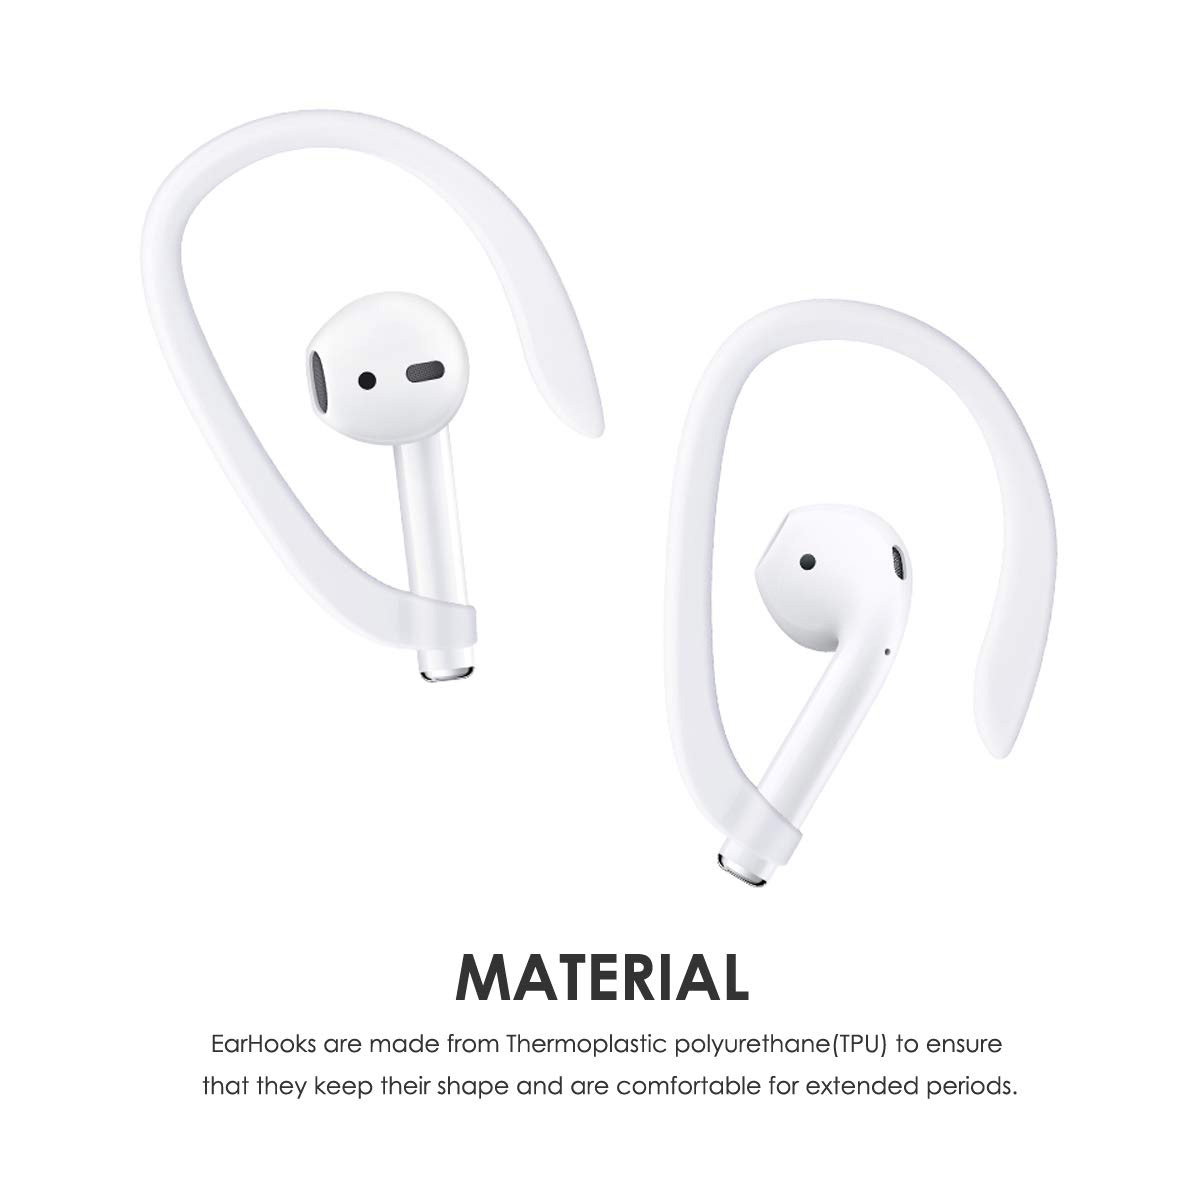 ''AirPods EarHook for Apple AirPods Great for Running, Jogging, Cycling, ''''''''''